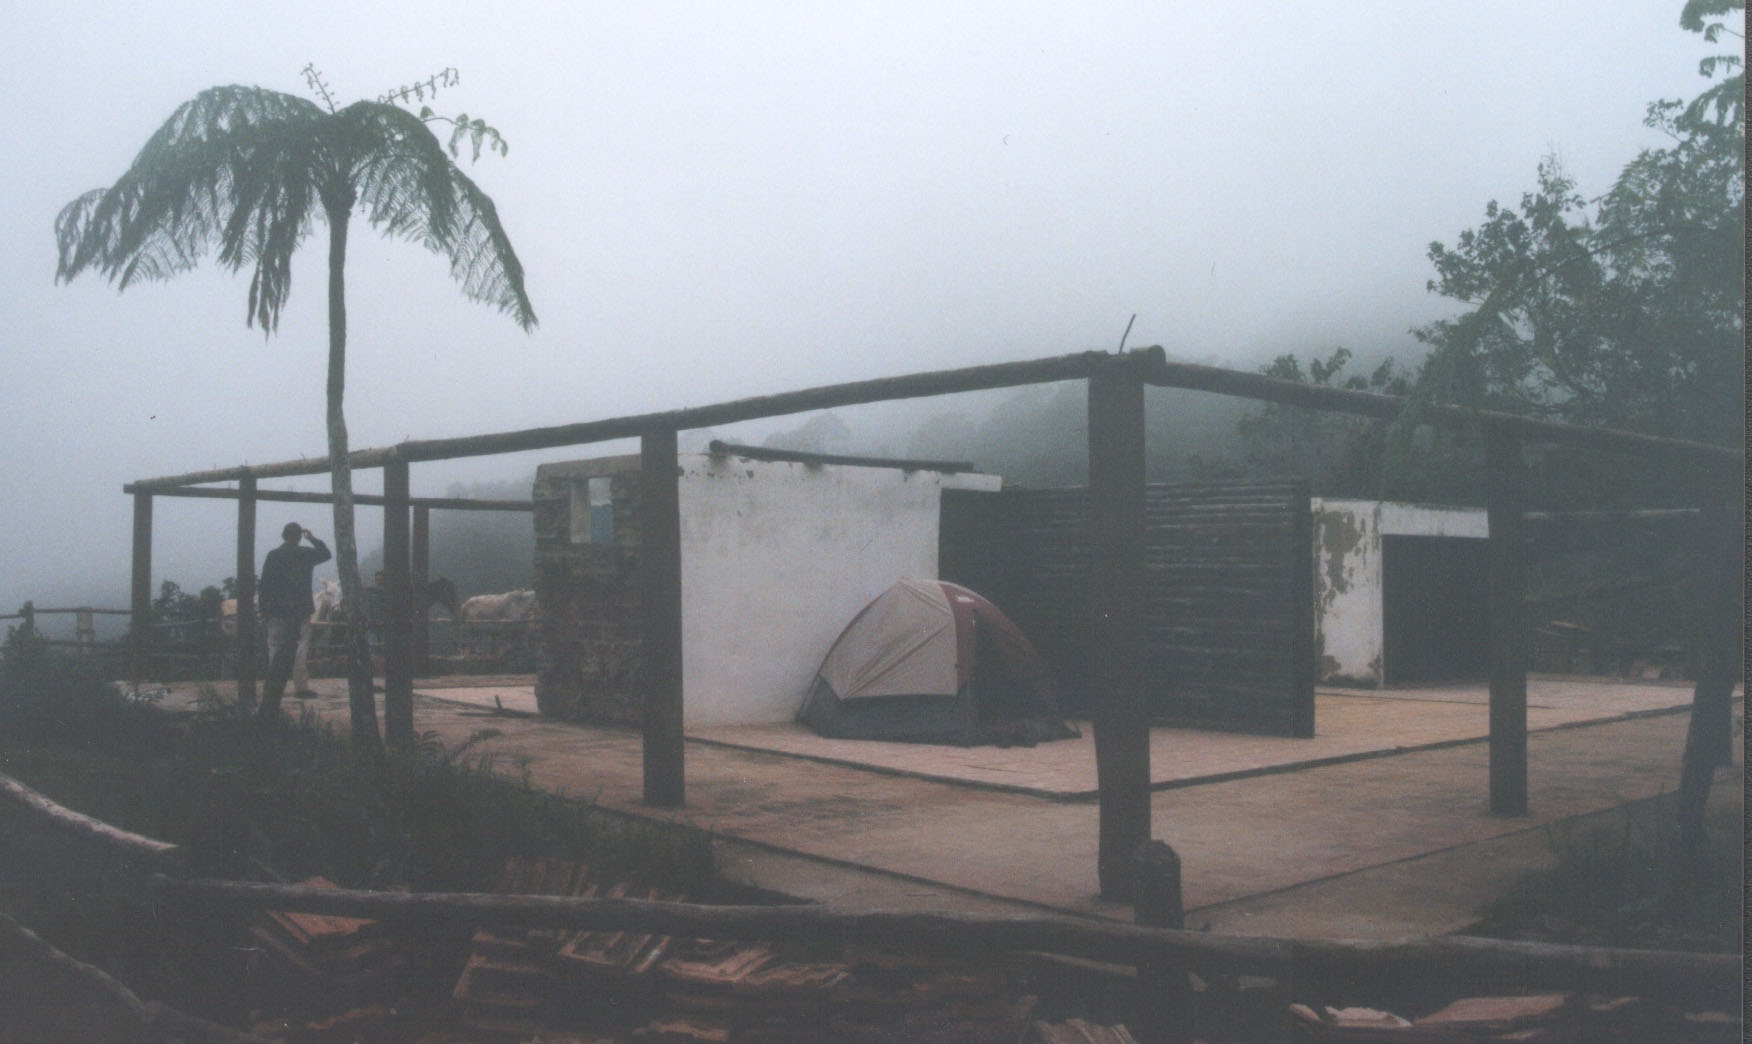 A wet early morning: camping in the destroyed remains of the old field station at La Sabina, Alturas de Banao during the Darwin Initiative project Biodiversity Conservation in Cuba